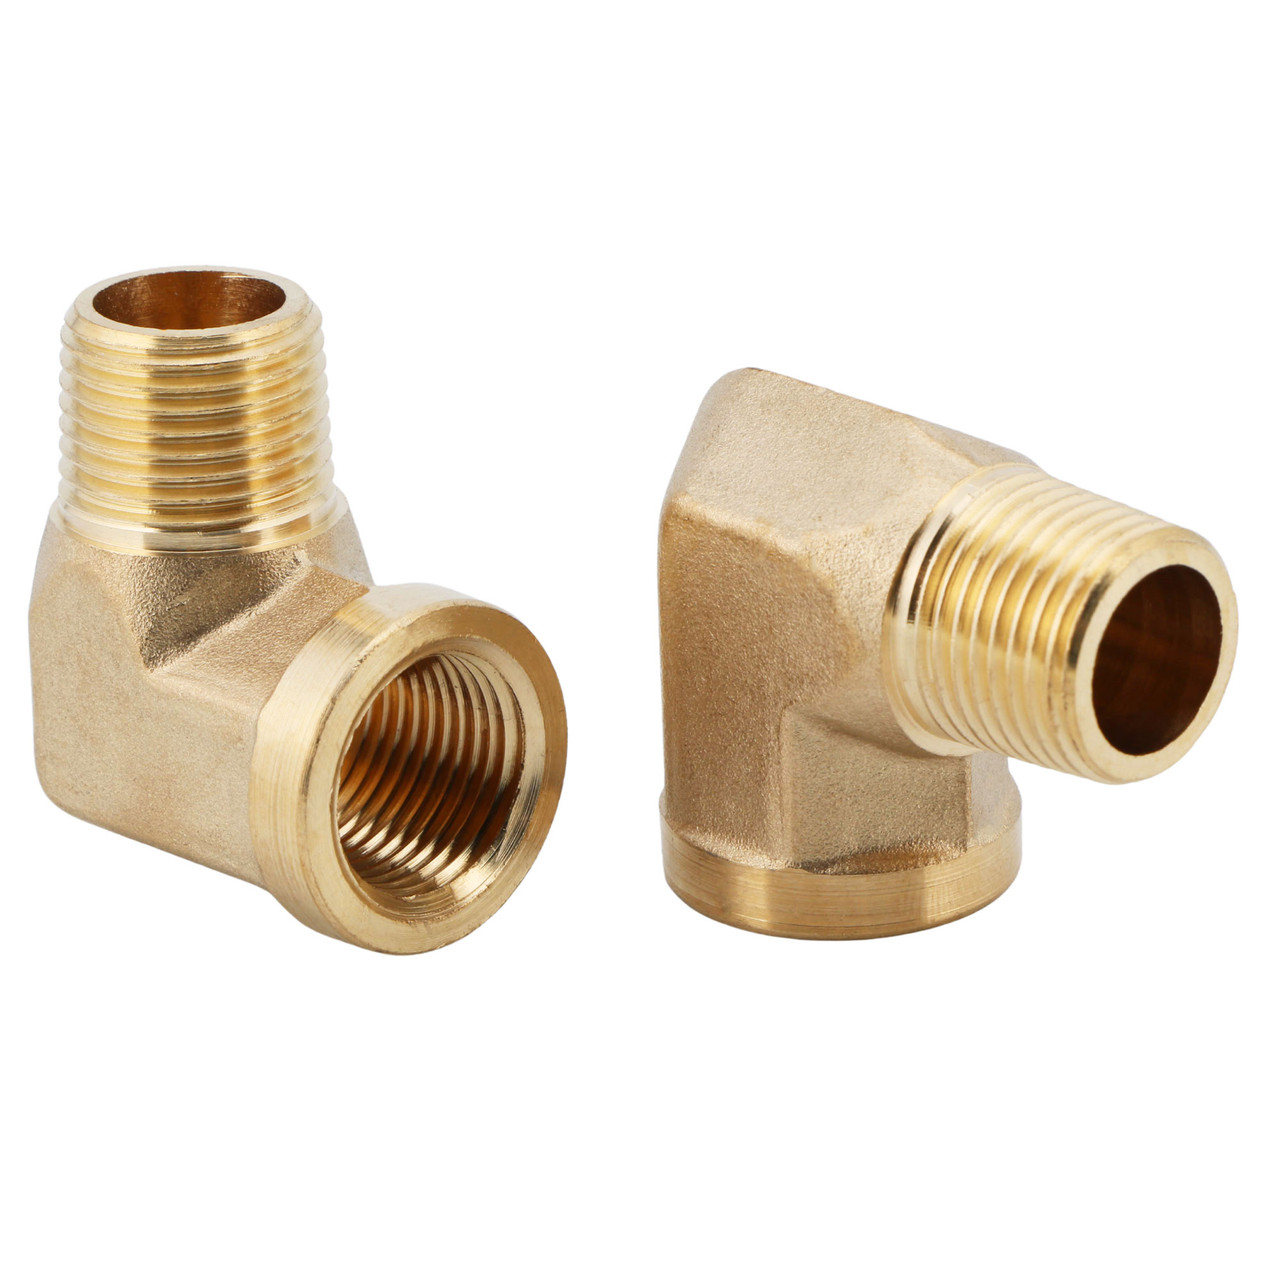 Brass Tee Pipe Fitting G1/2  Male Thread T Shaped Connector Coupler 2pcs 